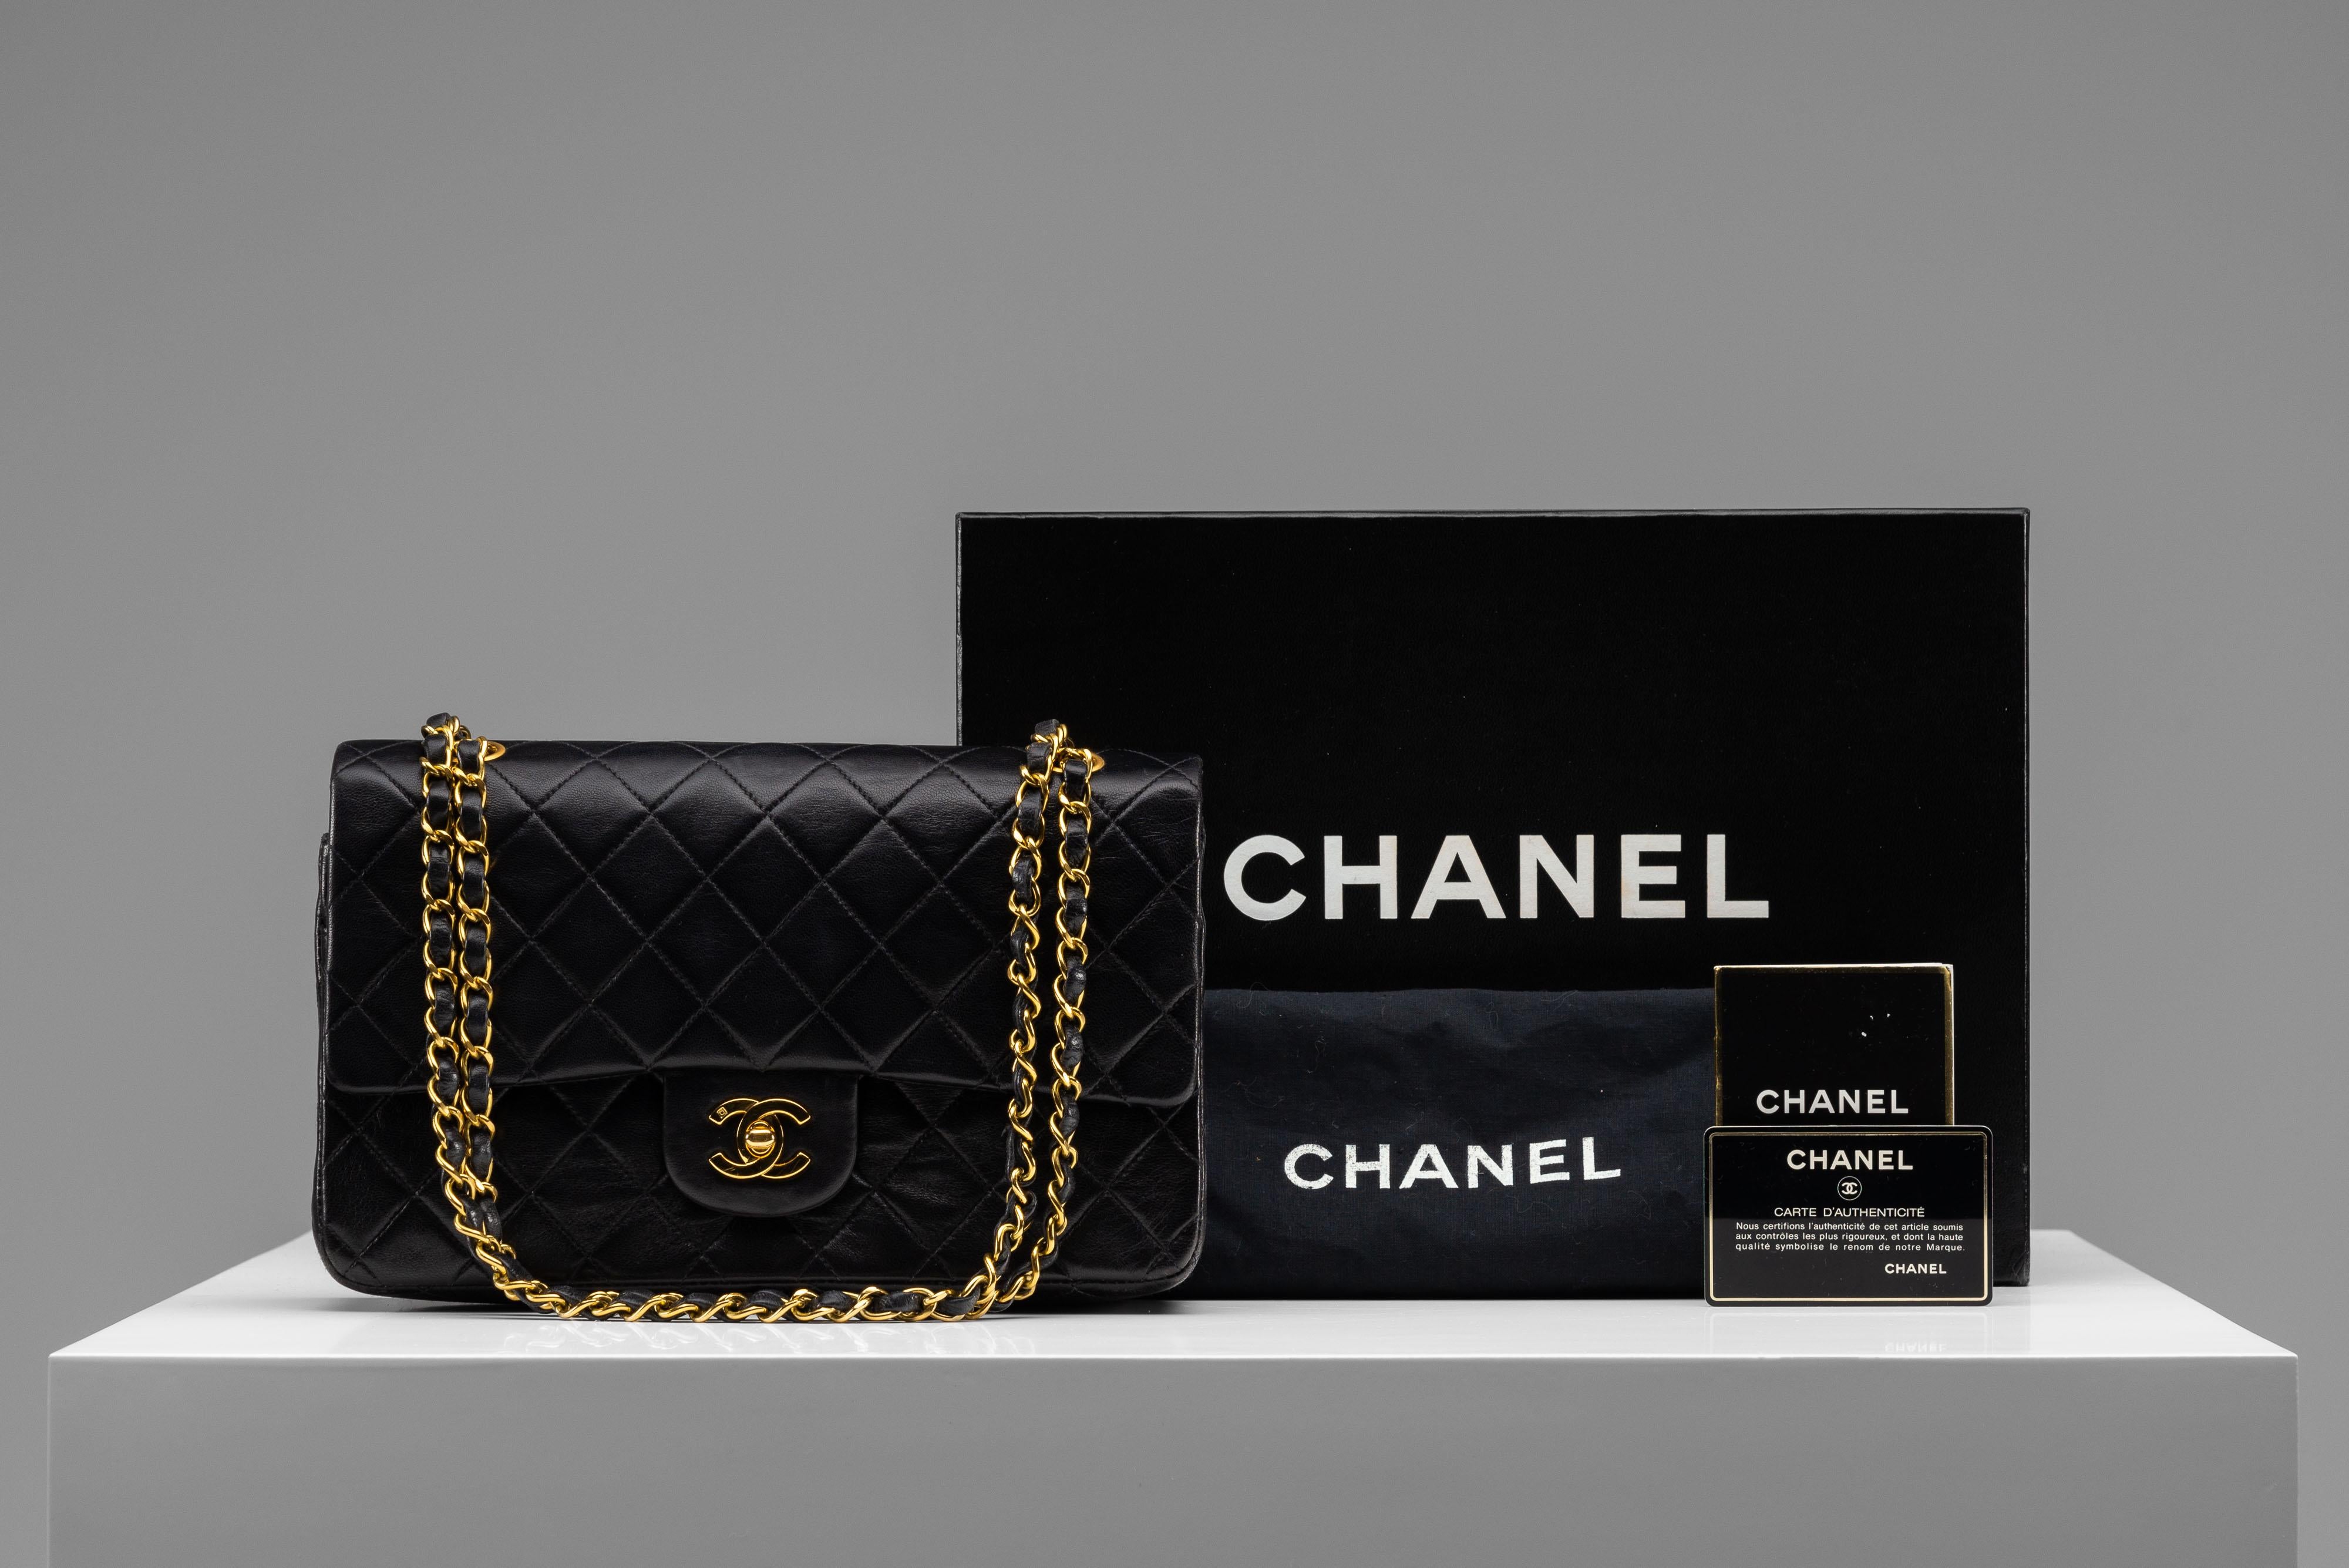 From the collection of SAVINETI we offer this Chanel Classic Flap Medium:

- Brand: Chanel
- Model: Classic Flap Medium
- Color: Black
- Year: 1994-1996
- Condition: Very Good Condition
- Materials: Lambskin leather, 24k gold-plated hardware
-